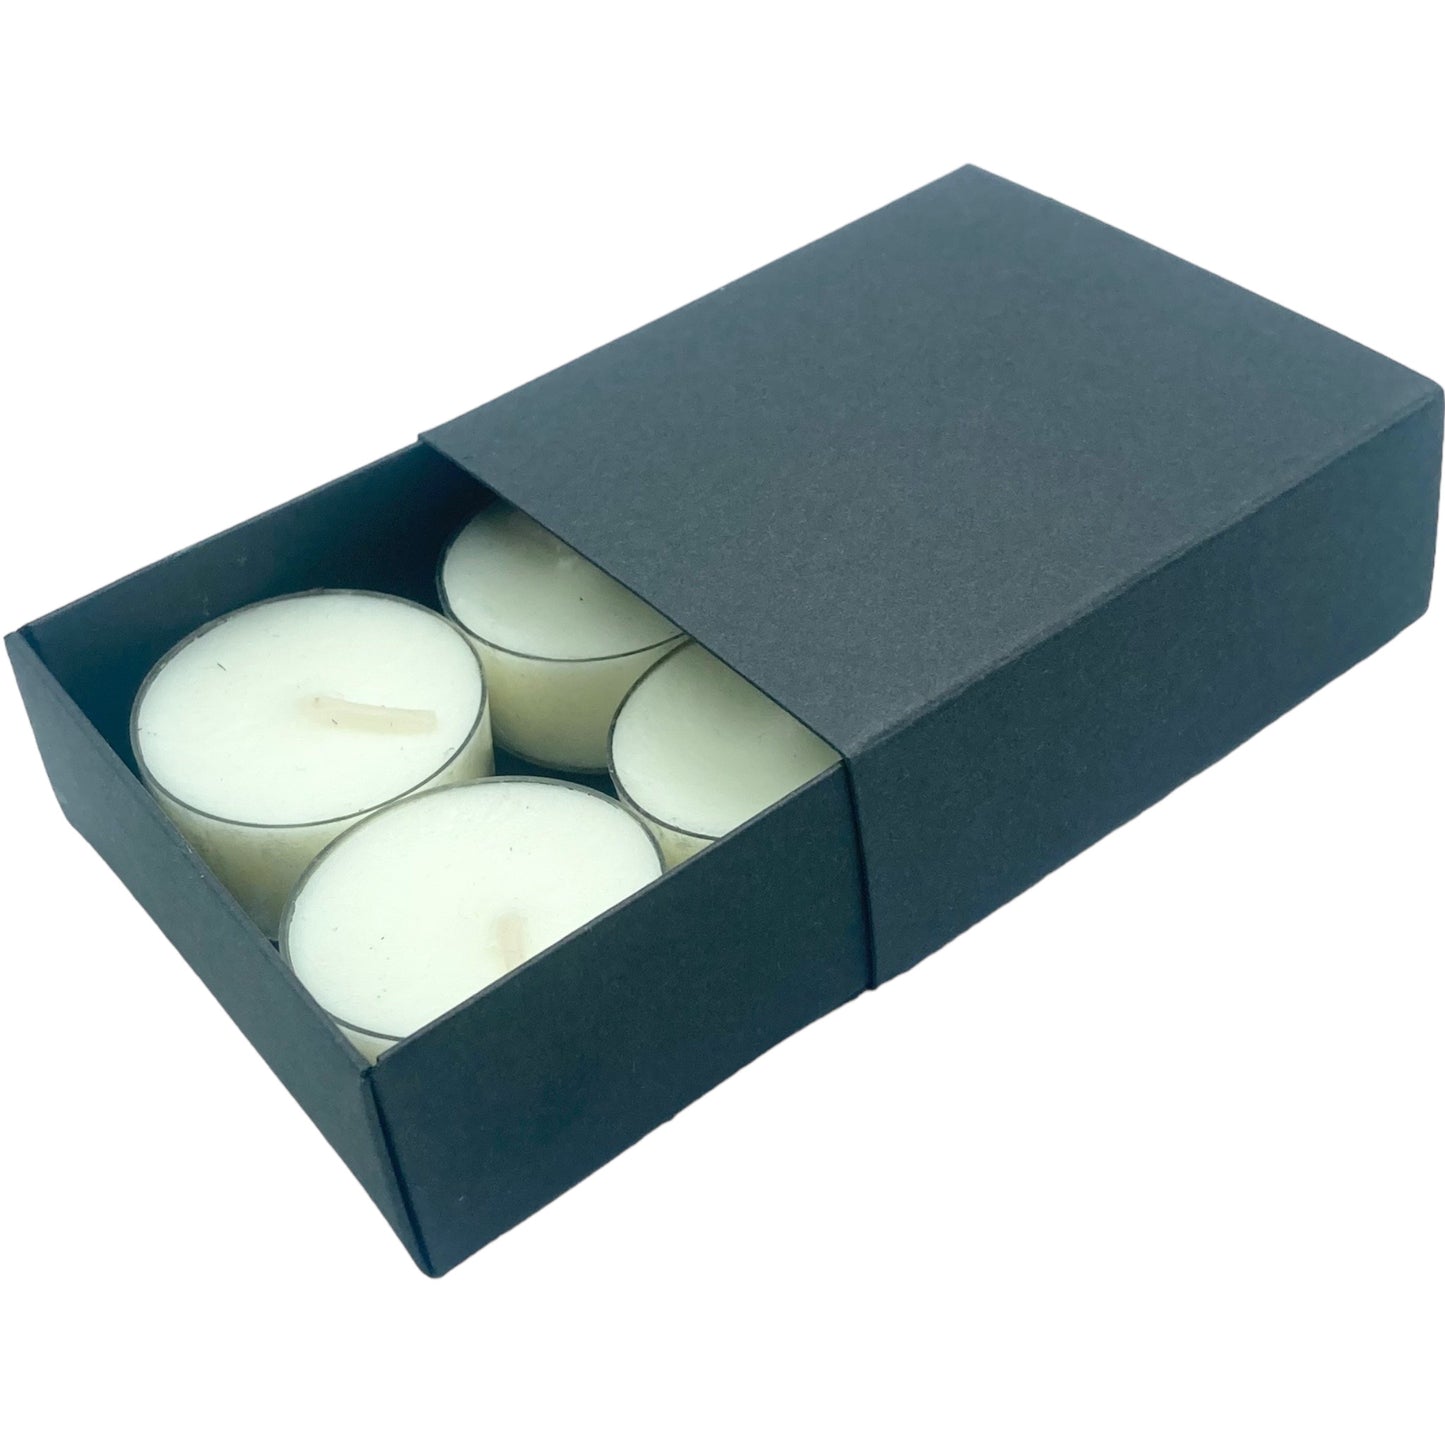 TEALIGHT CANDLE BOX WITH SLEEVE for 6 Tealights - BLACK (Pack of 10)